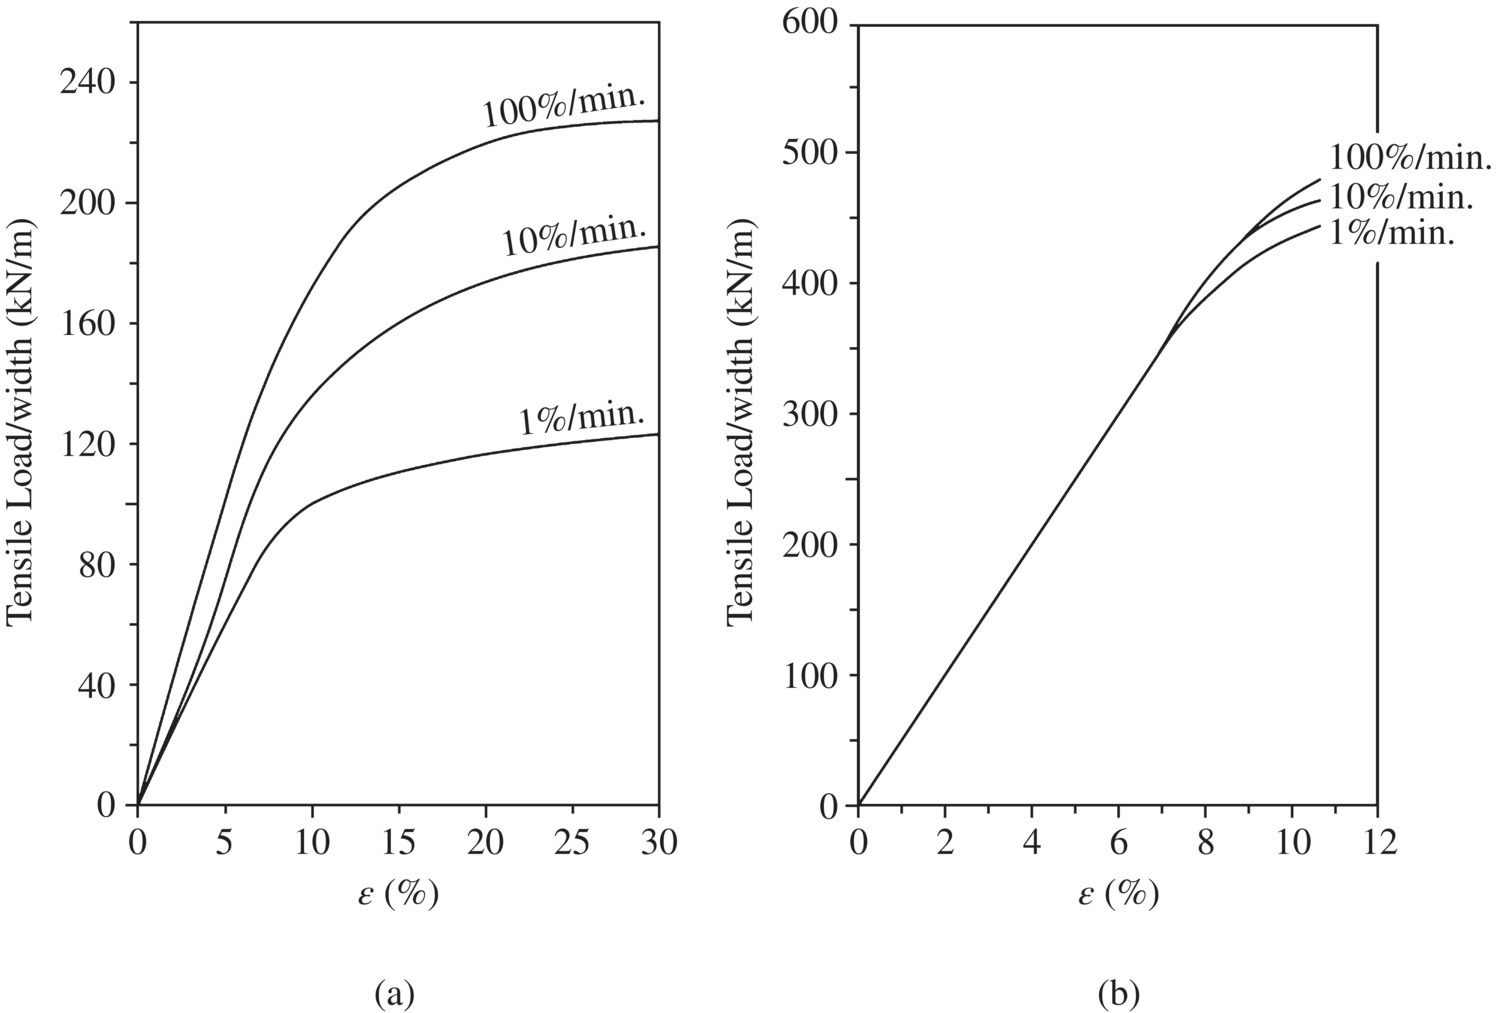 Graphs of uniaxial load–deformation relationships of a polyethylene (left) and a polyester (right) geotextile, as influenced by strain rate. Each graph displays 3 ascending curves for 100%/min., 10%/min., and 1%/min.